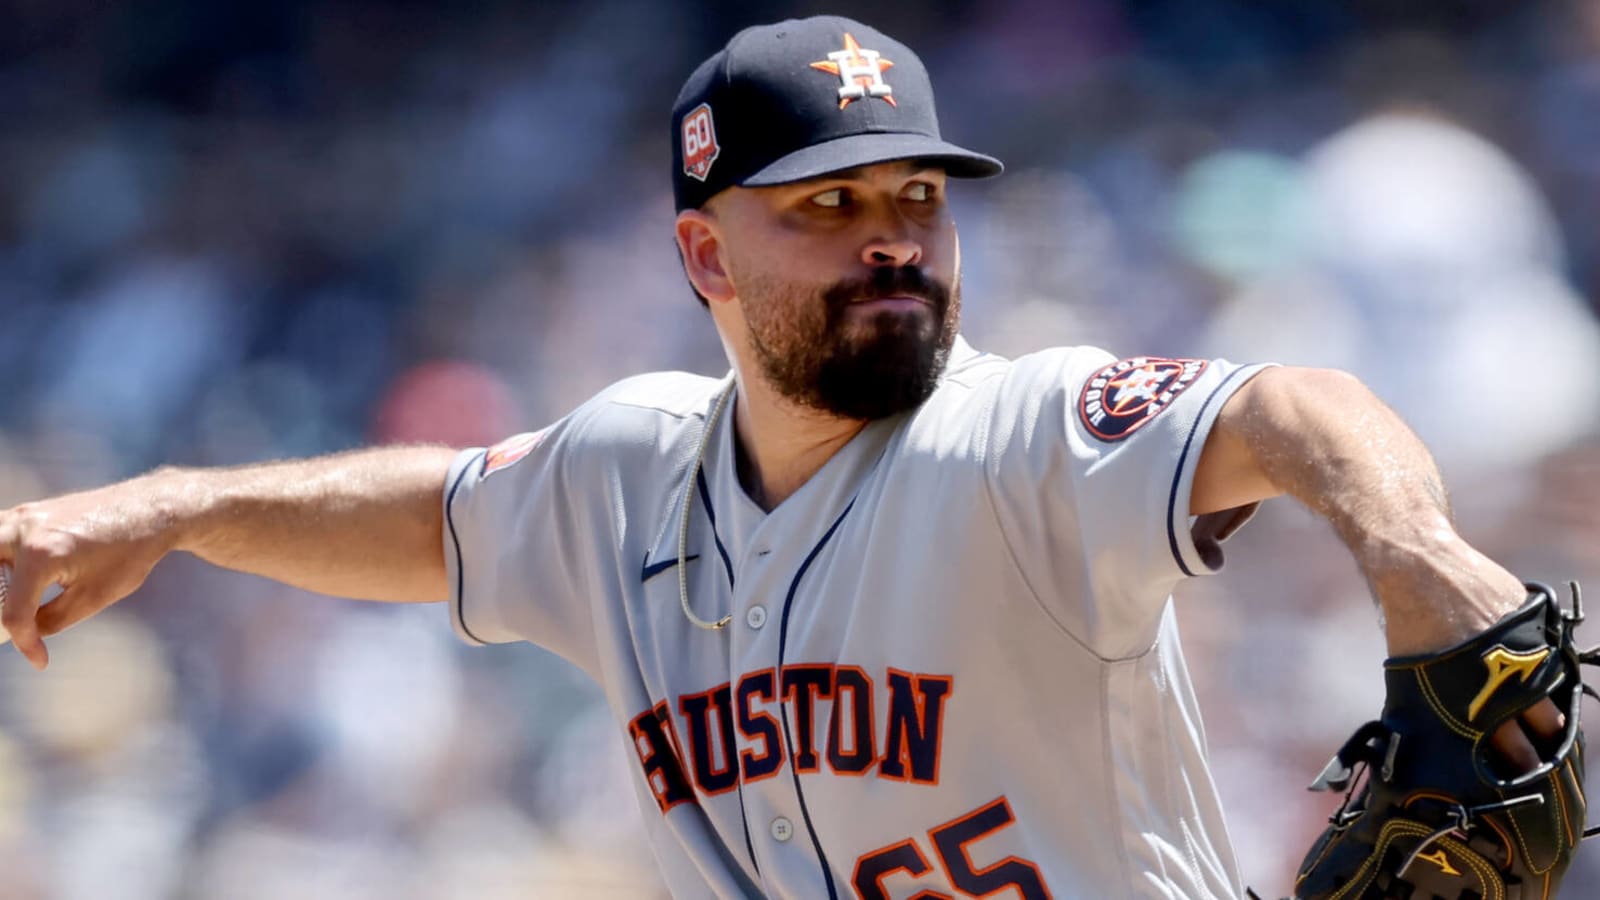 Astros willing to listen to offers on controllable starting pitching